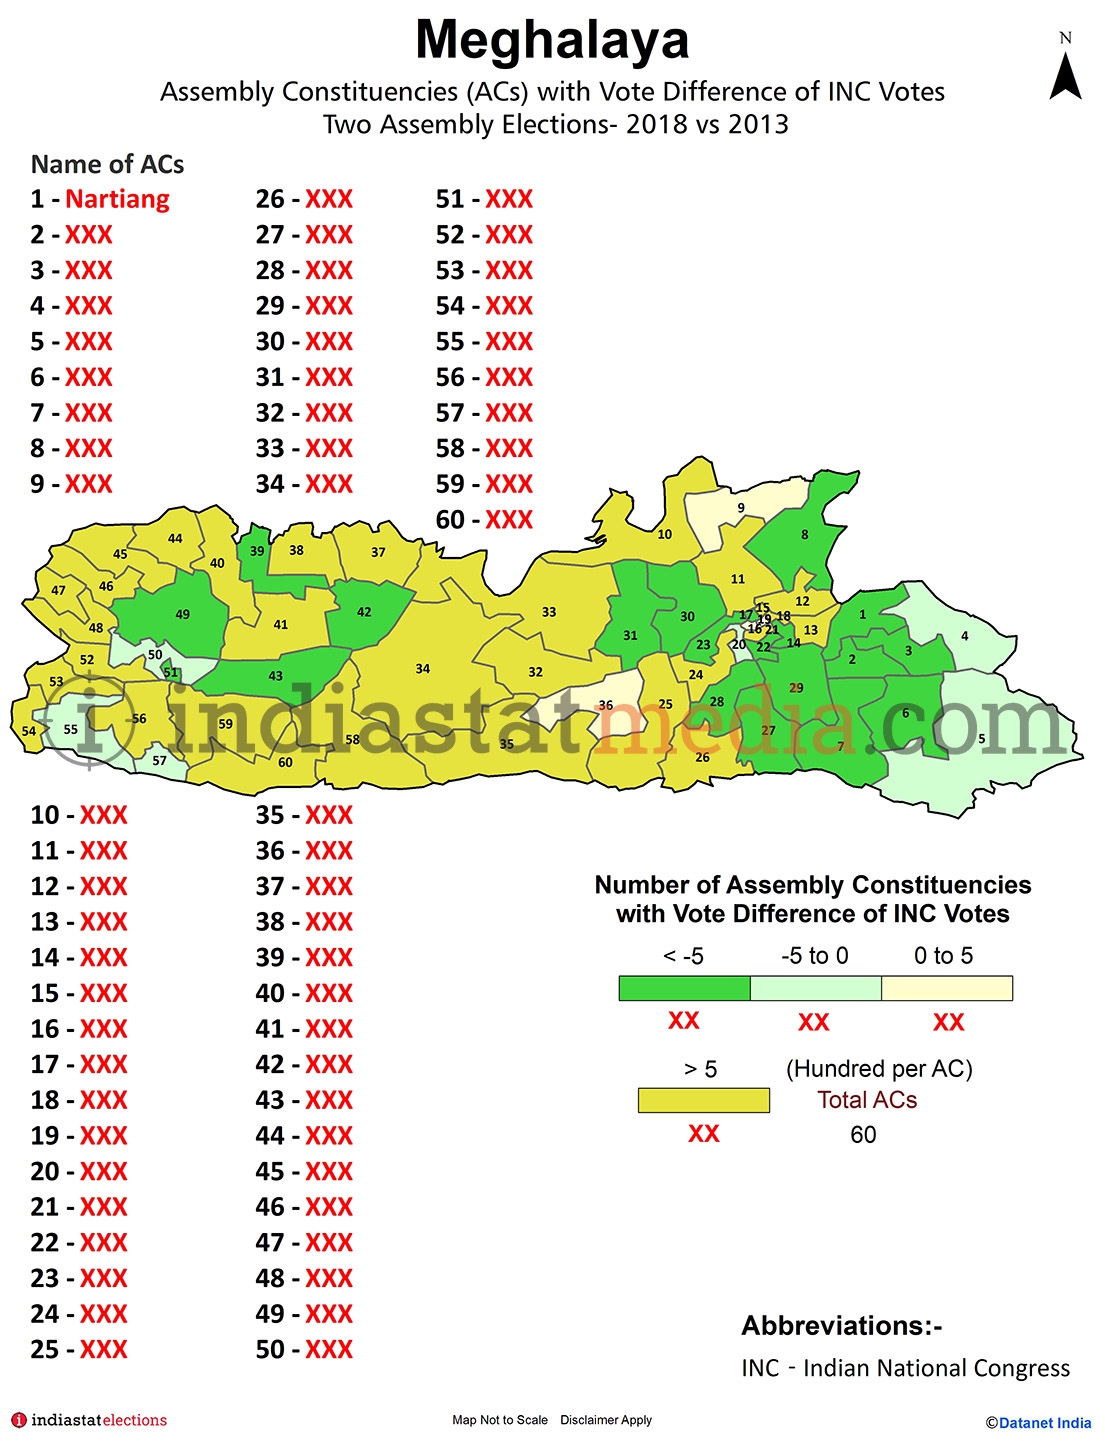 Assembly Constituencies with Vote Difference of INC Votes in Meghalaya (Assembly Election - 2013 & 2018)